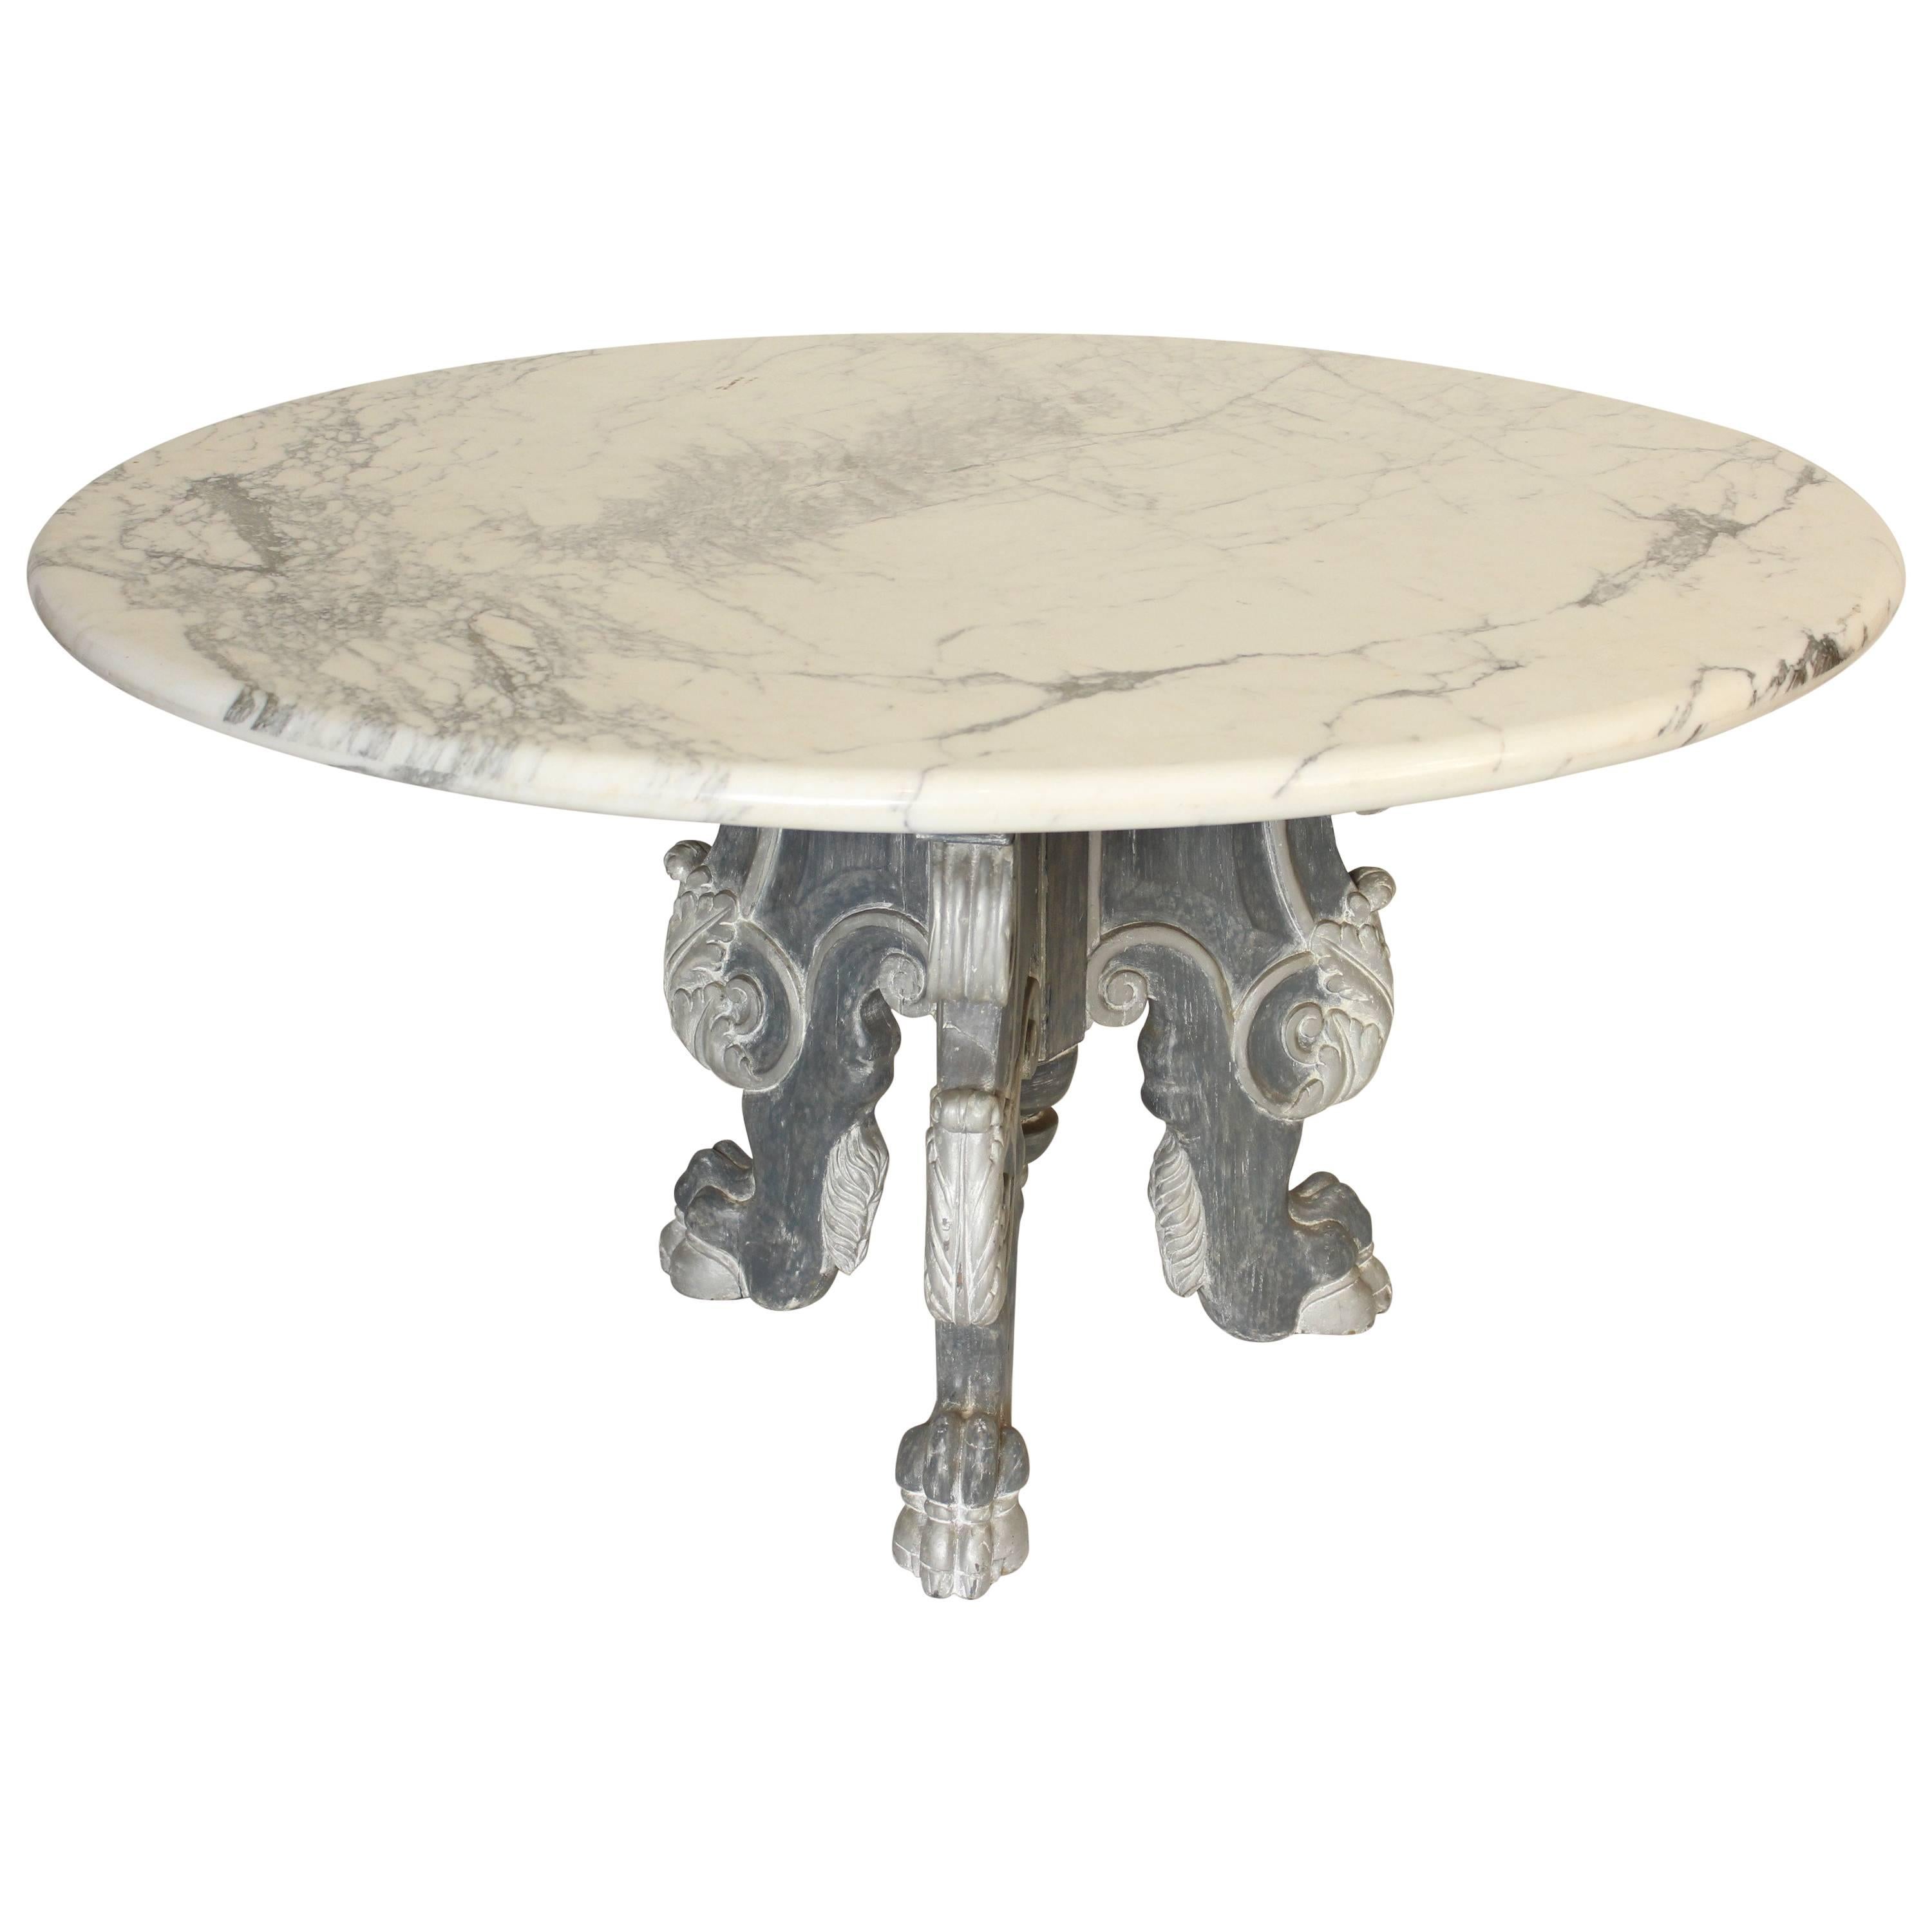 Italian Baroque Style Dining Table